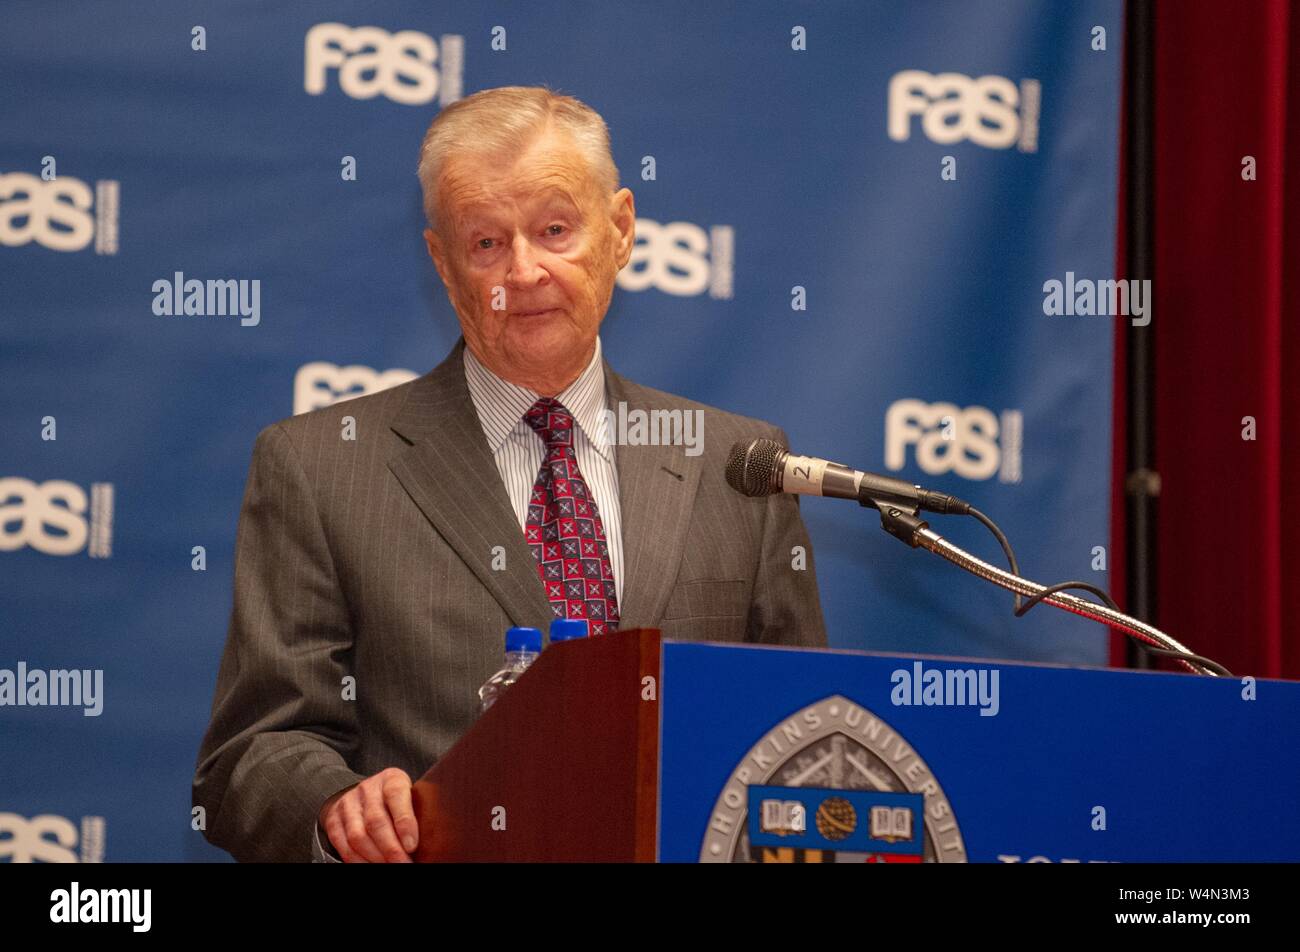 Political scientist Zbigniew Brzezinski (1928 - 2017) speaks during a Foreign Affairs Symposium at the Johns Hopkins University in Baltimore, Maryland, February 23, 2010. From the Homewood Photography collection. () Stock Photo